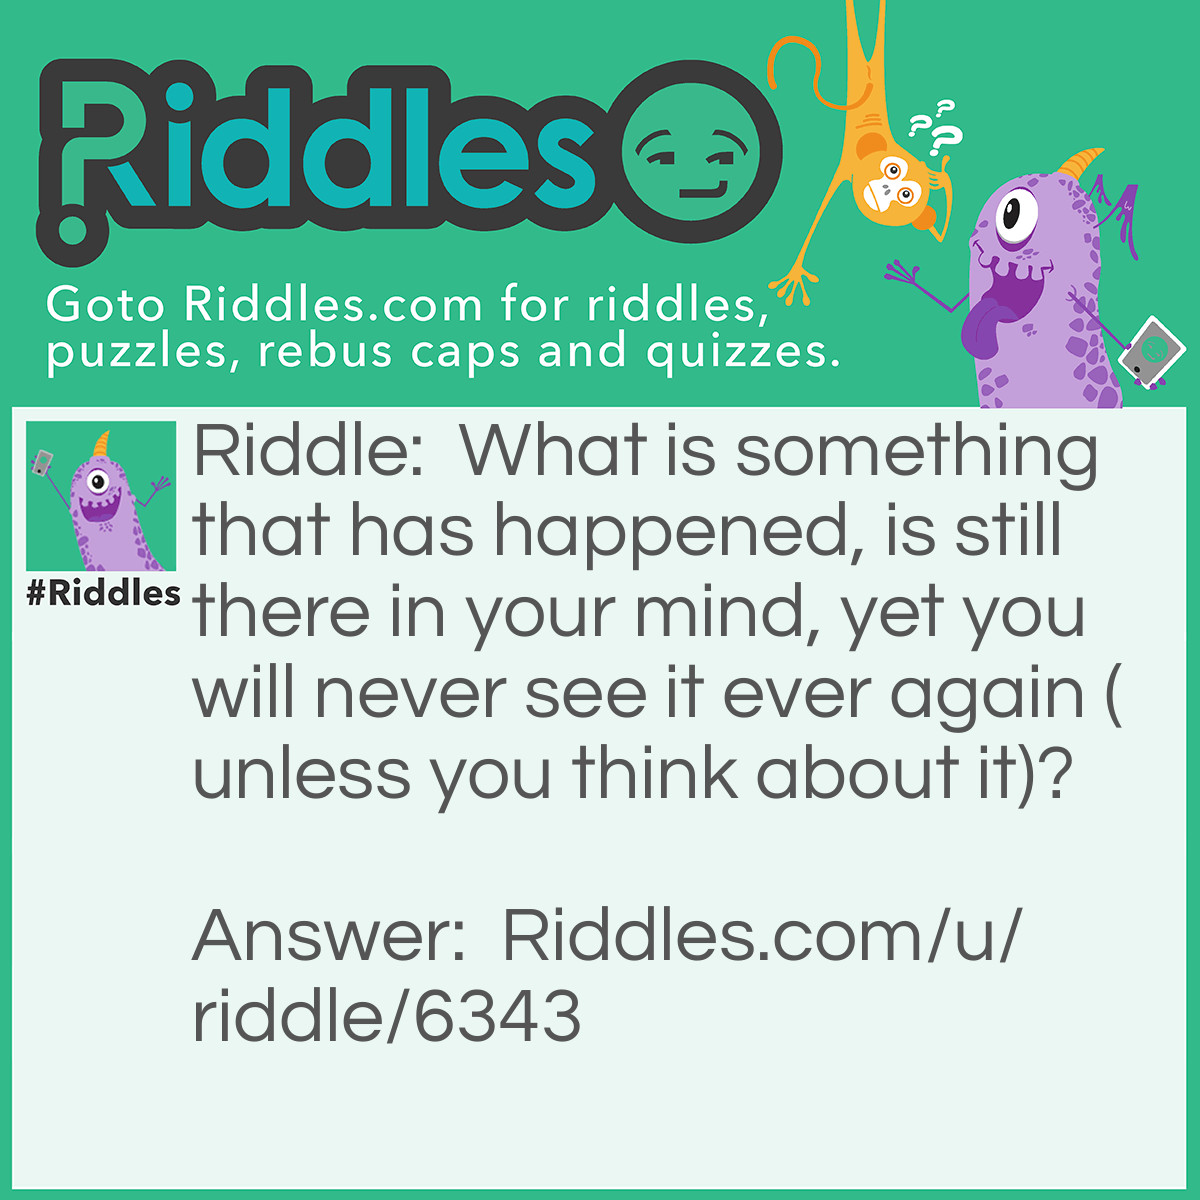 Riddle: What is something that has happened, is still there in your mind, yet you will never see it ever again (unless you think about it)? Answer: Yesterday.